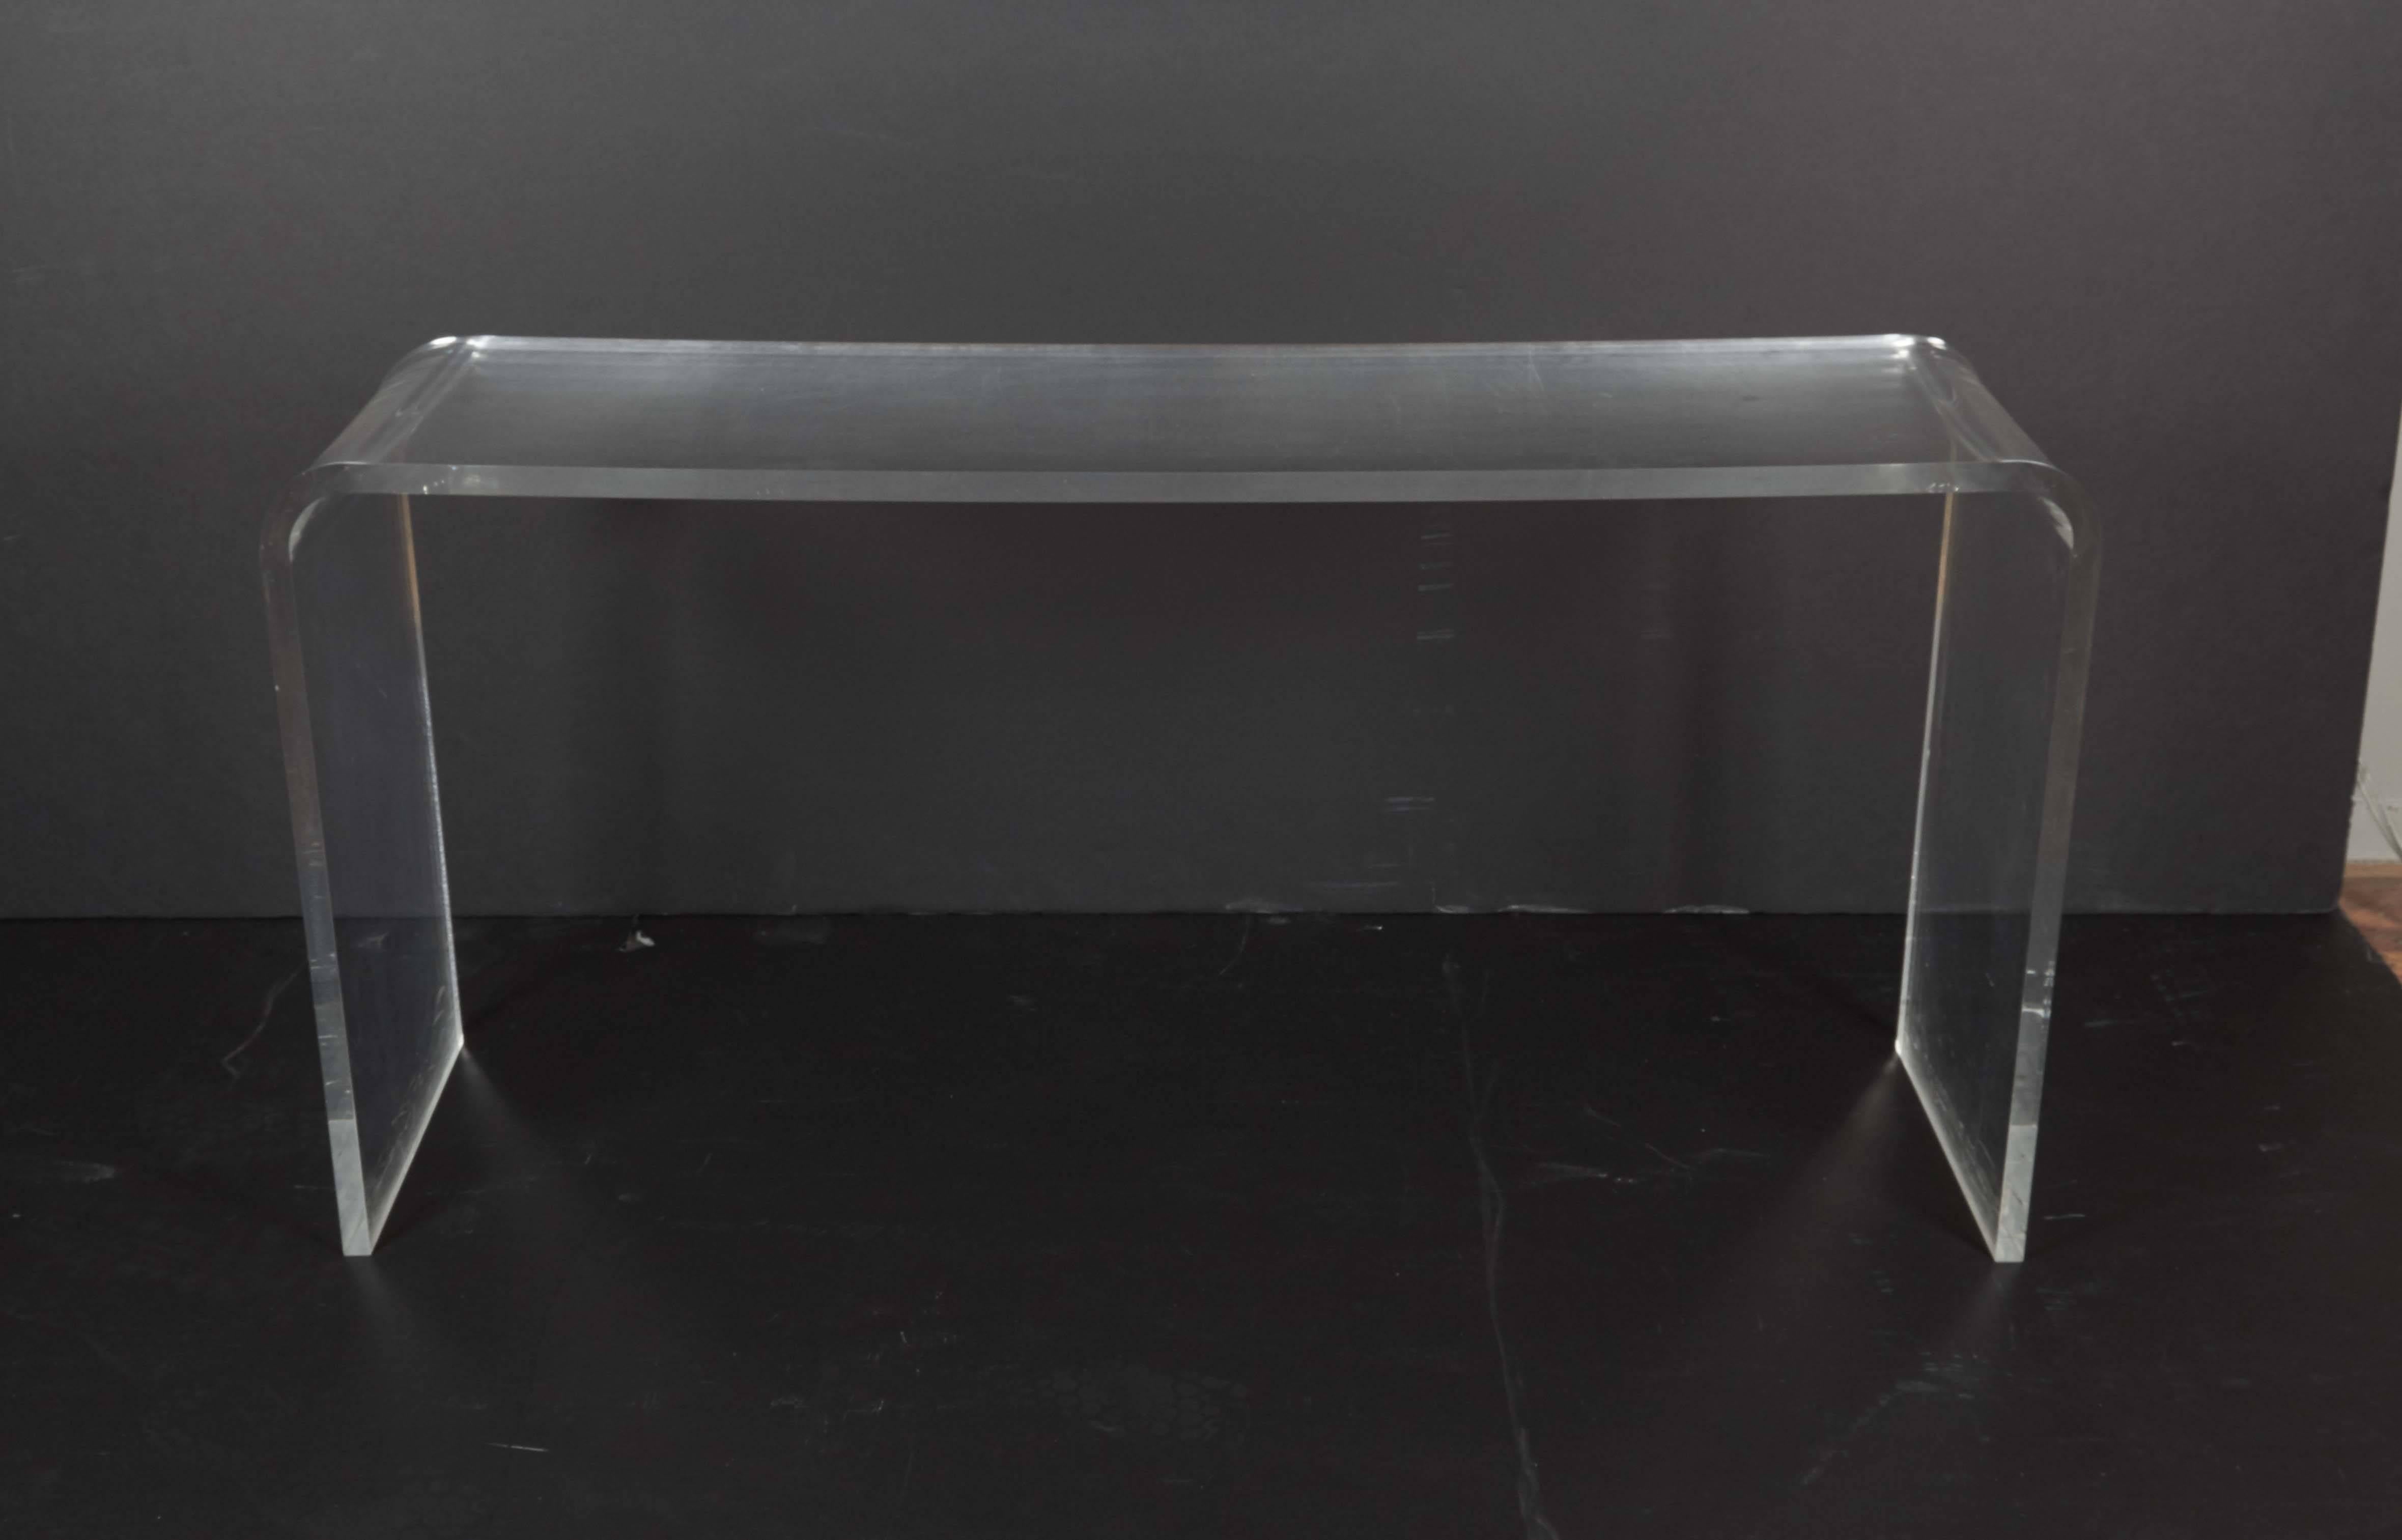 A modernist waterfall console table, entirely in Lucite, circa 1970s. This console remains in good overall condition, any presence of wear consistent with age and use.

10361